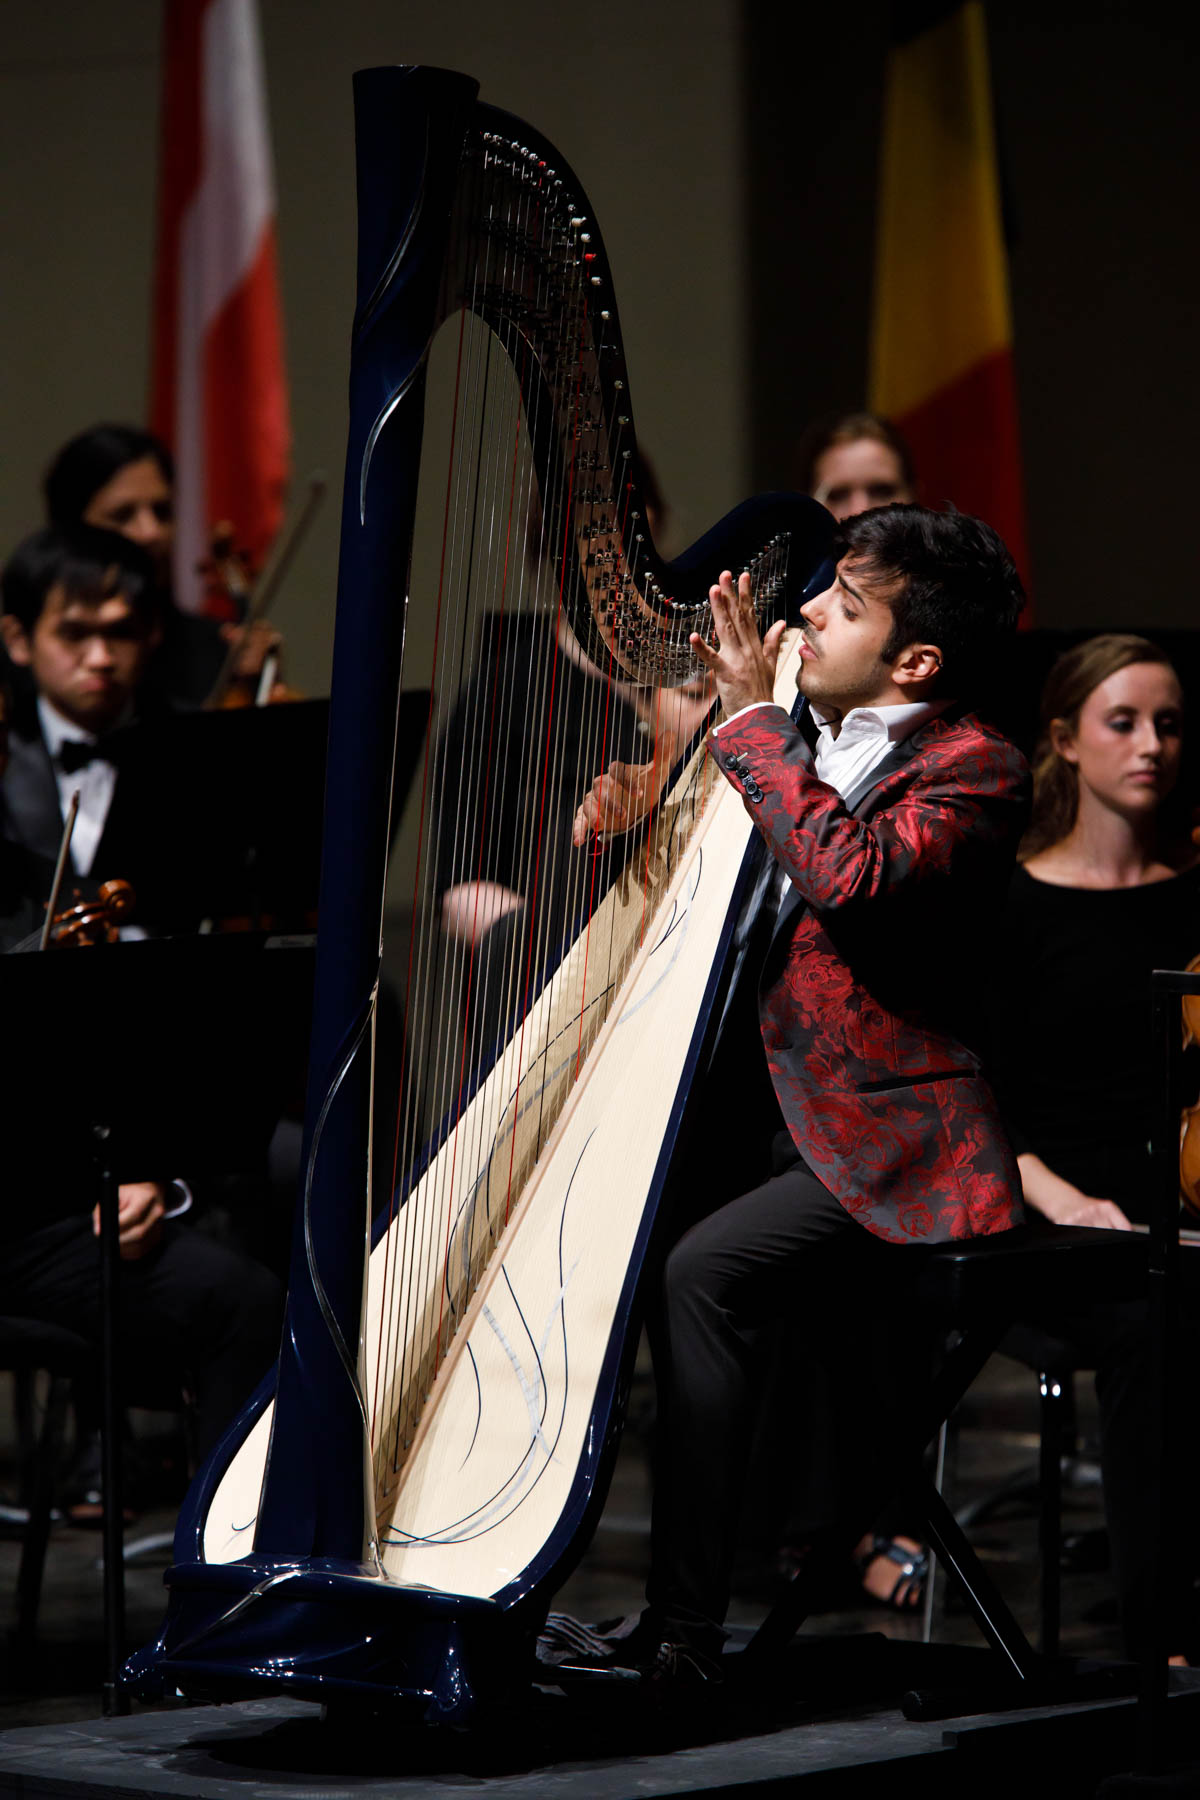 Valerio Lisci of Italy performs with the Indiana University Summer Philharmonic Orchestra during the Stage IV concert at the 11th USA International Harp Competition at Indiana University in Bloomington, Indiana on Saturday, July 13, 2019. (Photo by James Brosher)